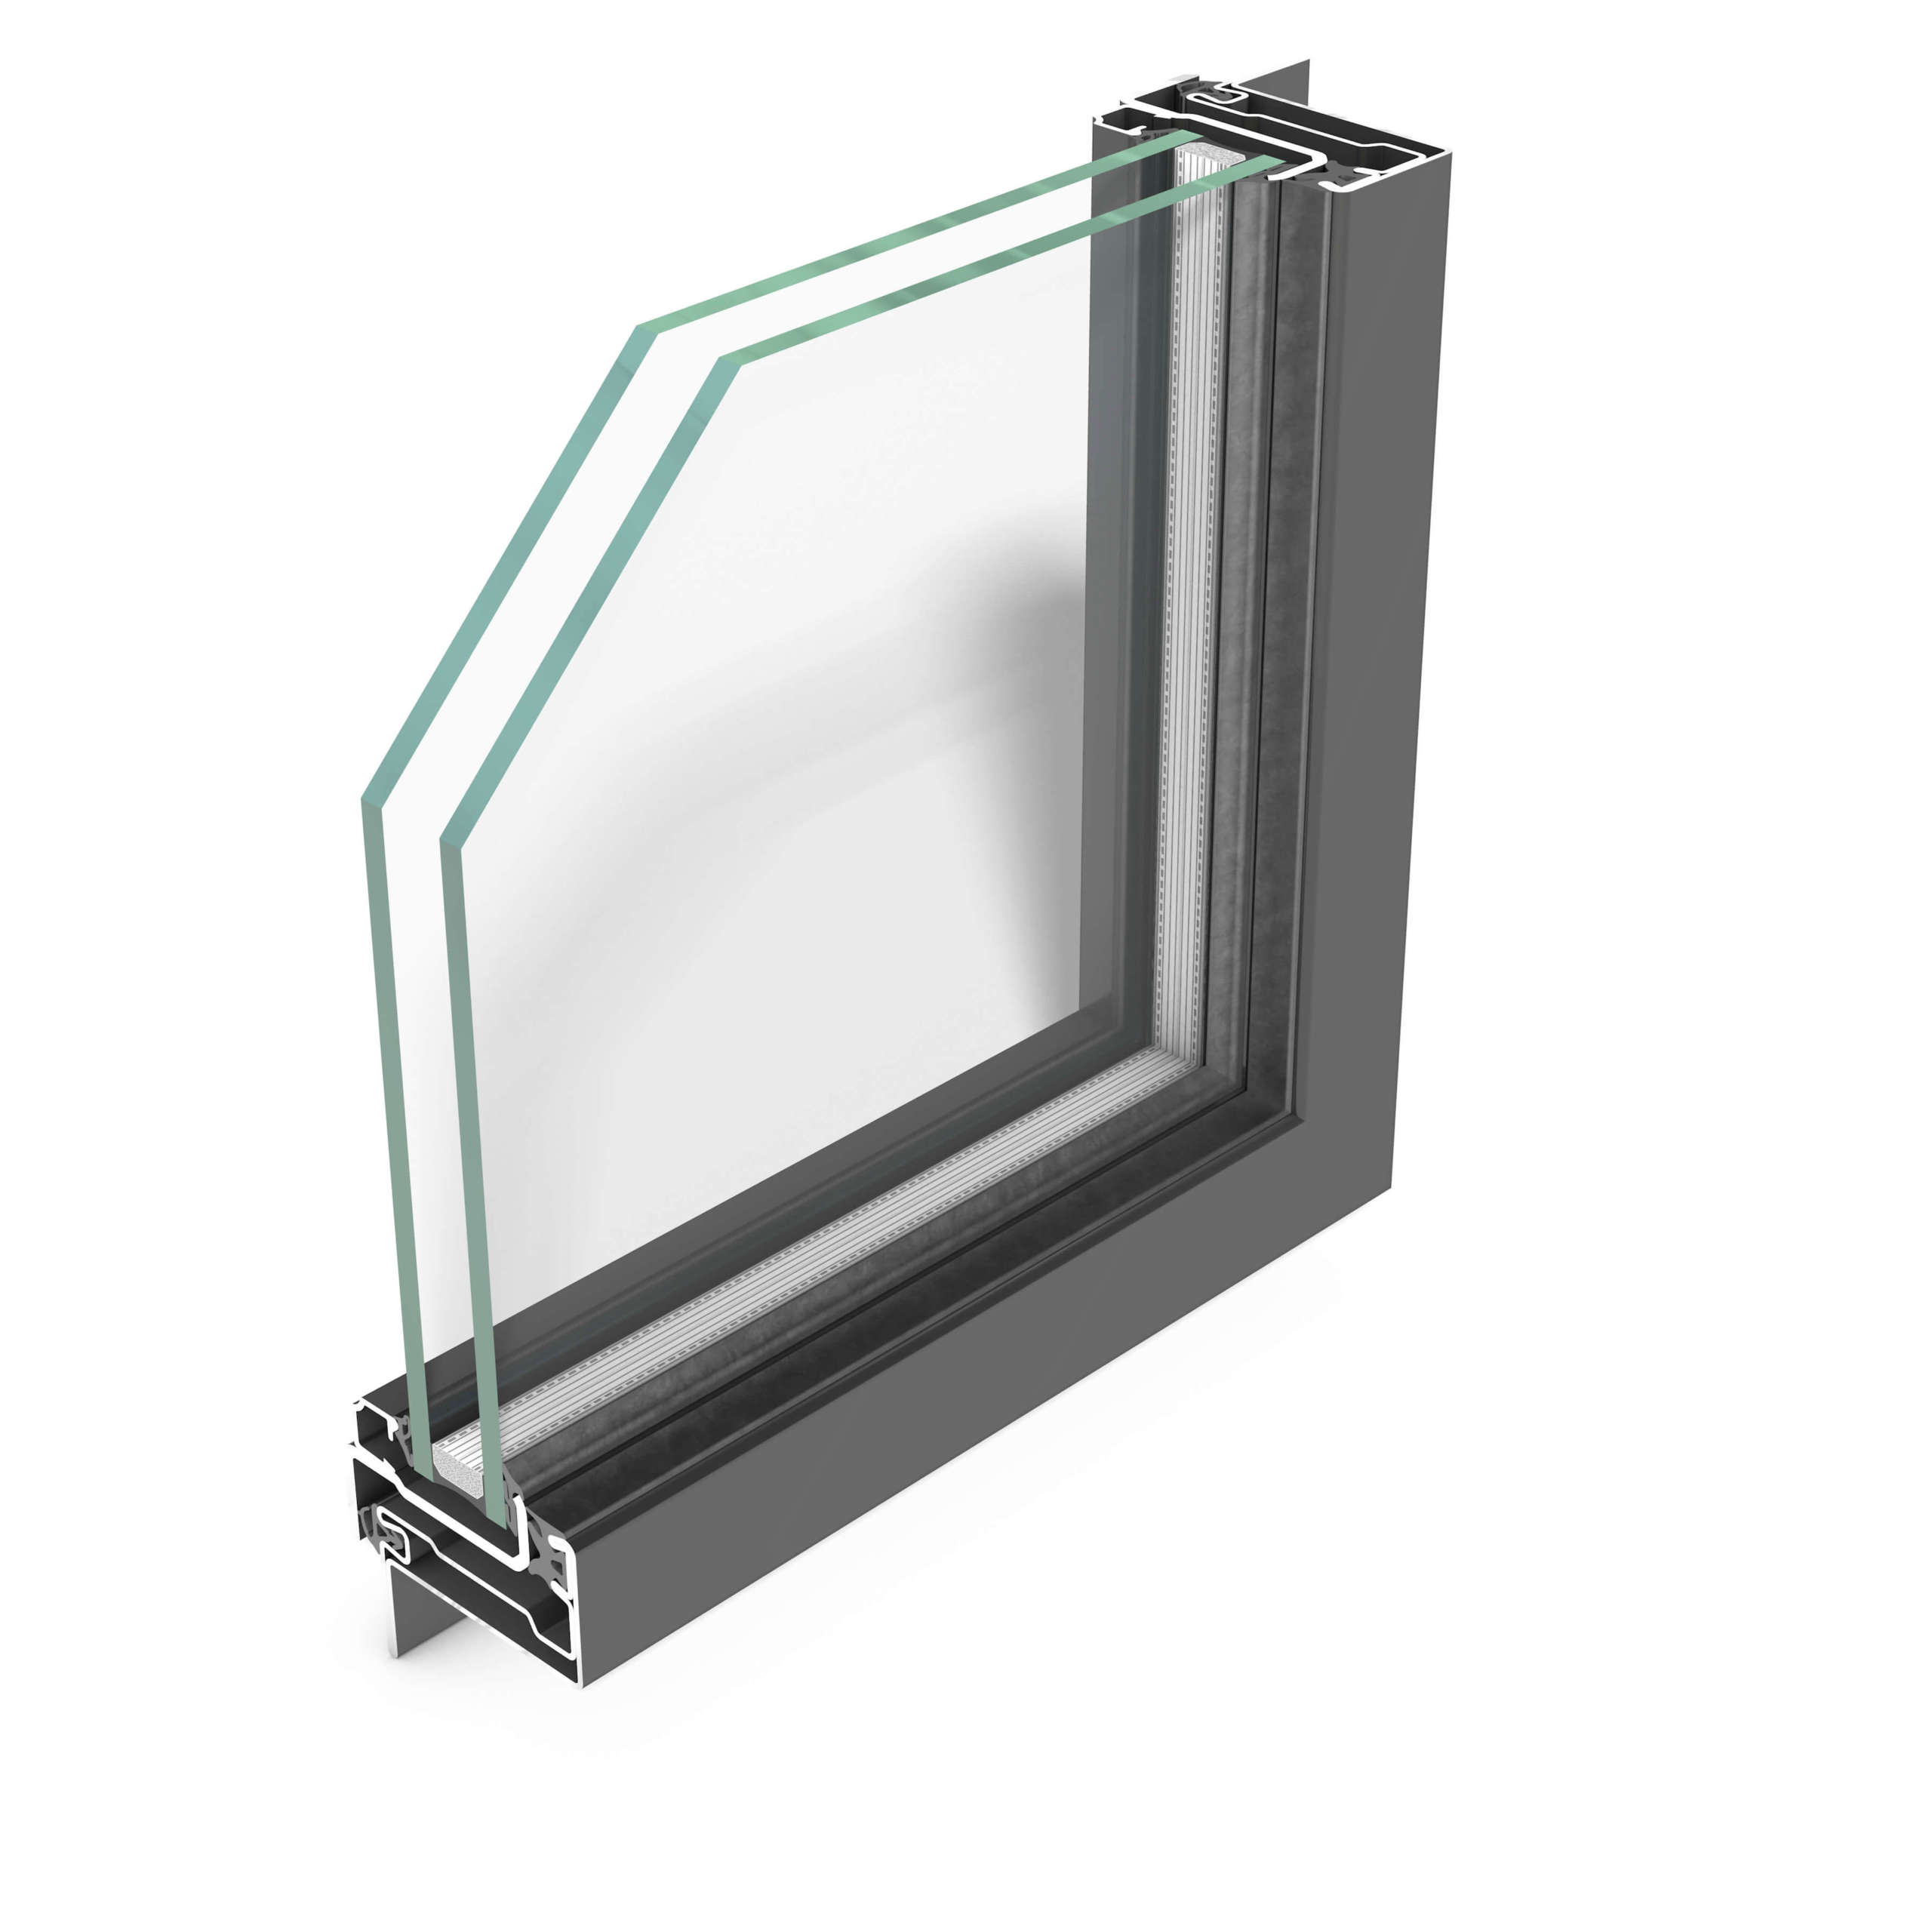 rp fineline 60W – steel profile system for windows, featuring uniquely slim face widths